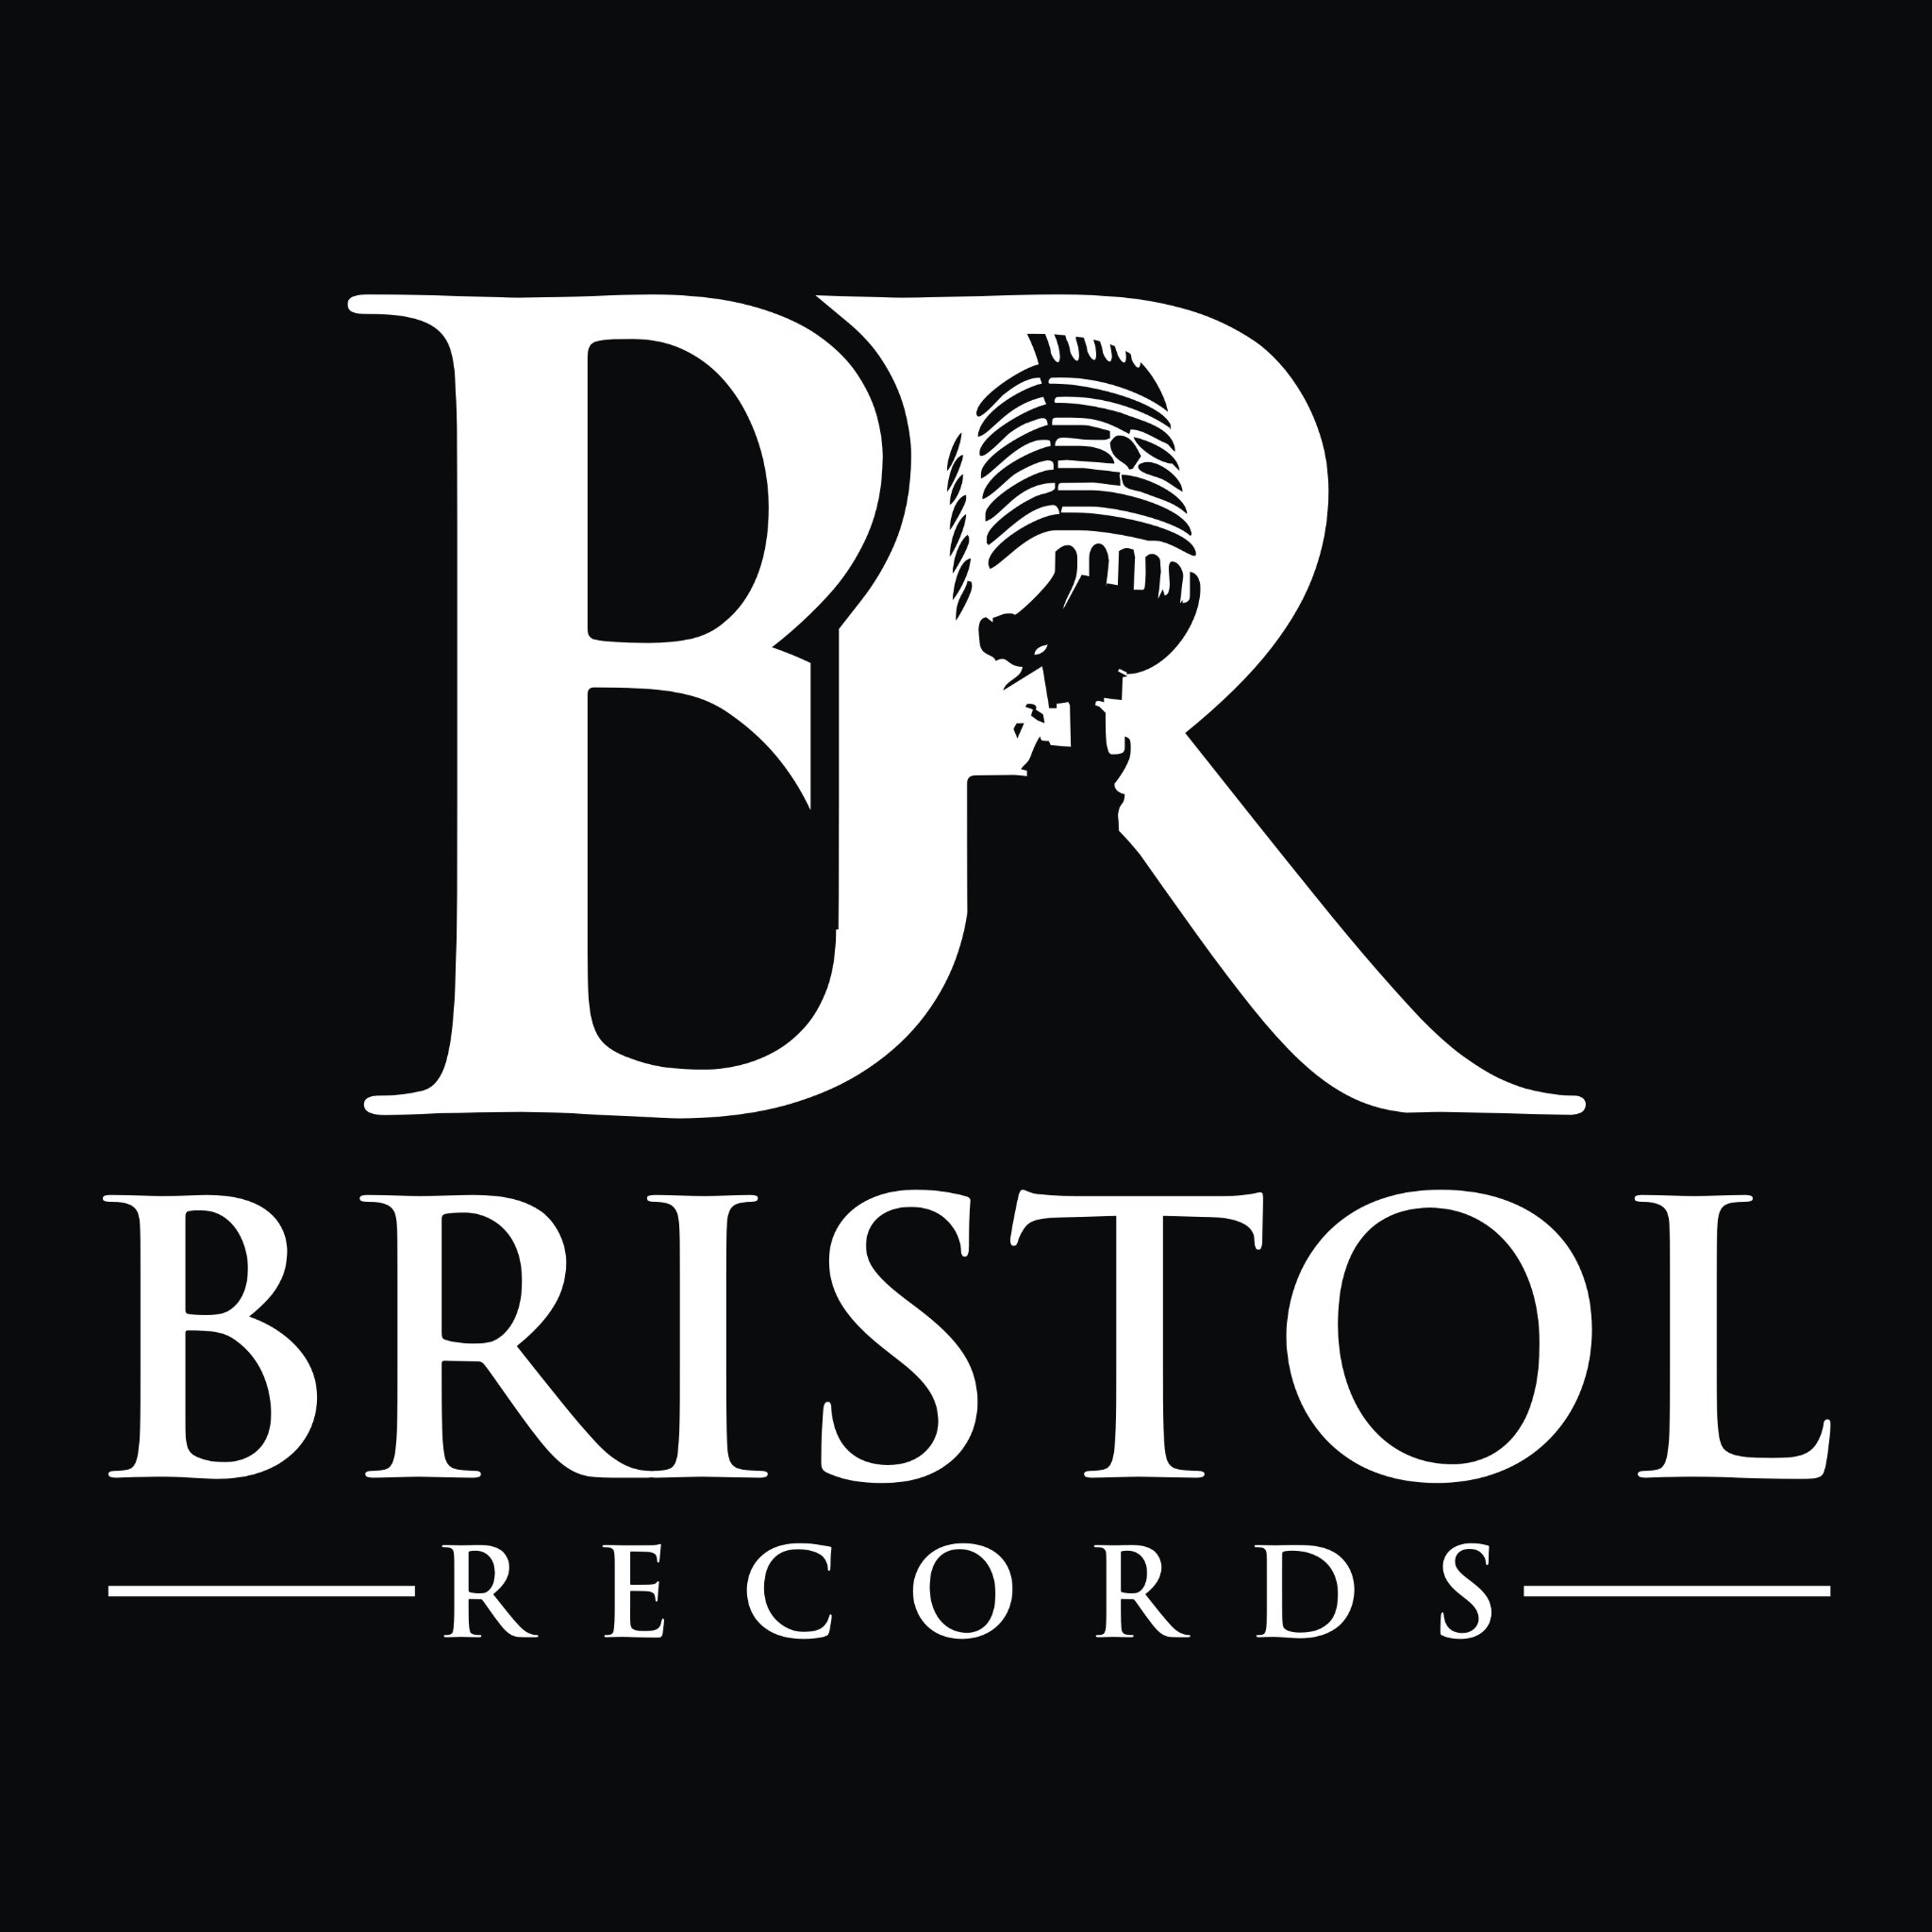 Bristol Records is a international recognized label group. Our signed artists include Hillbilly Vegas and Rod Black.